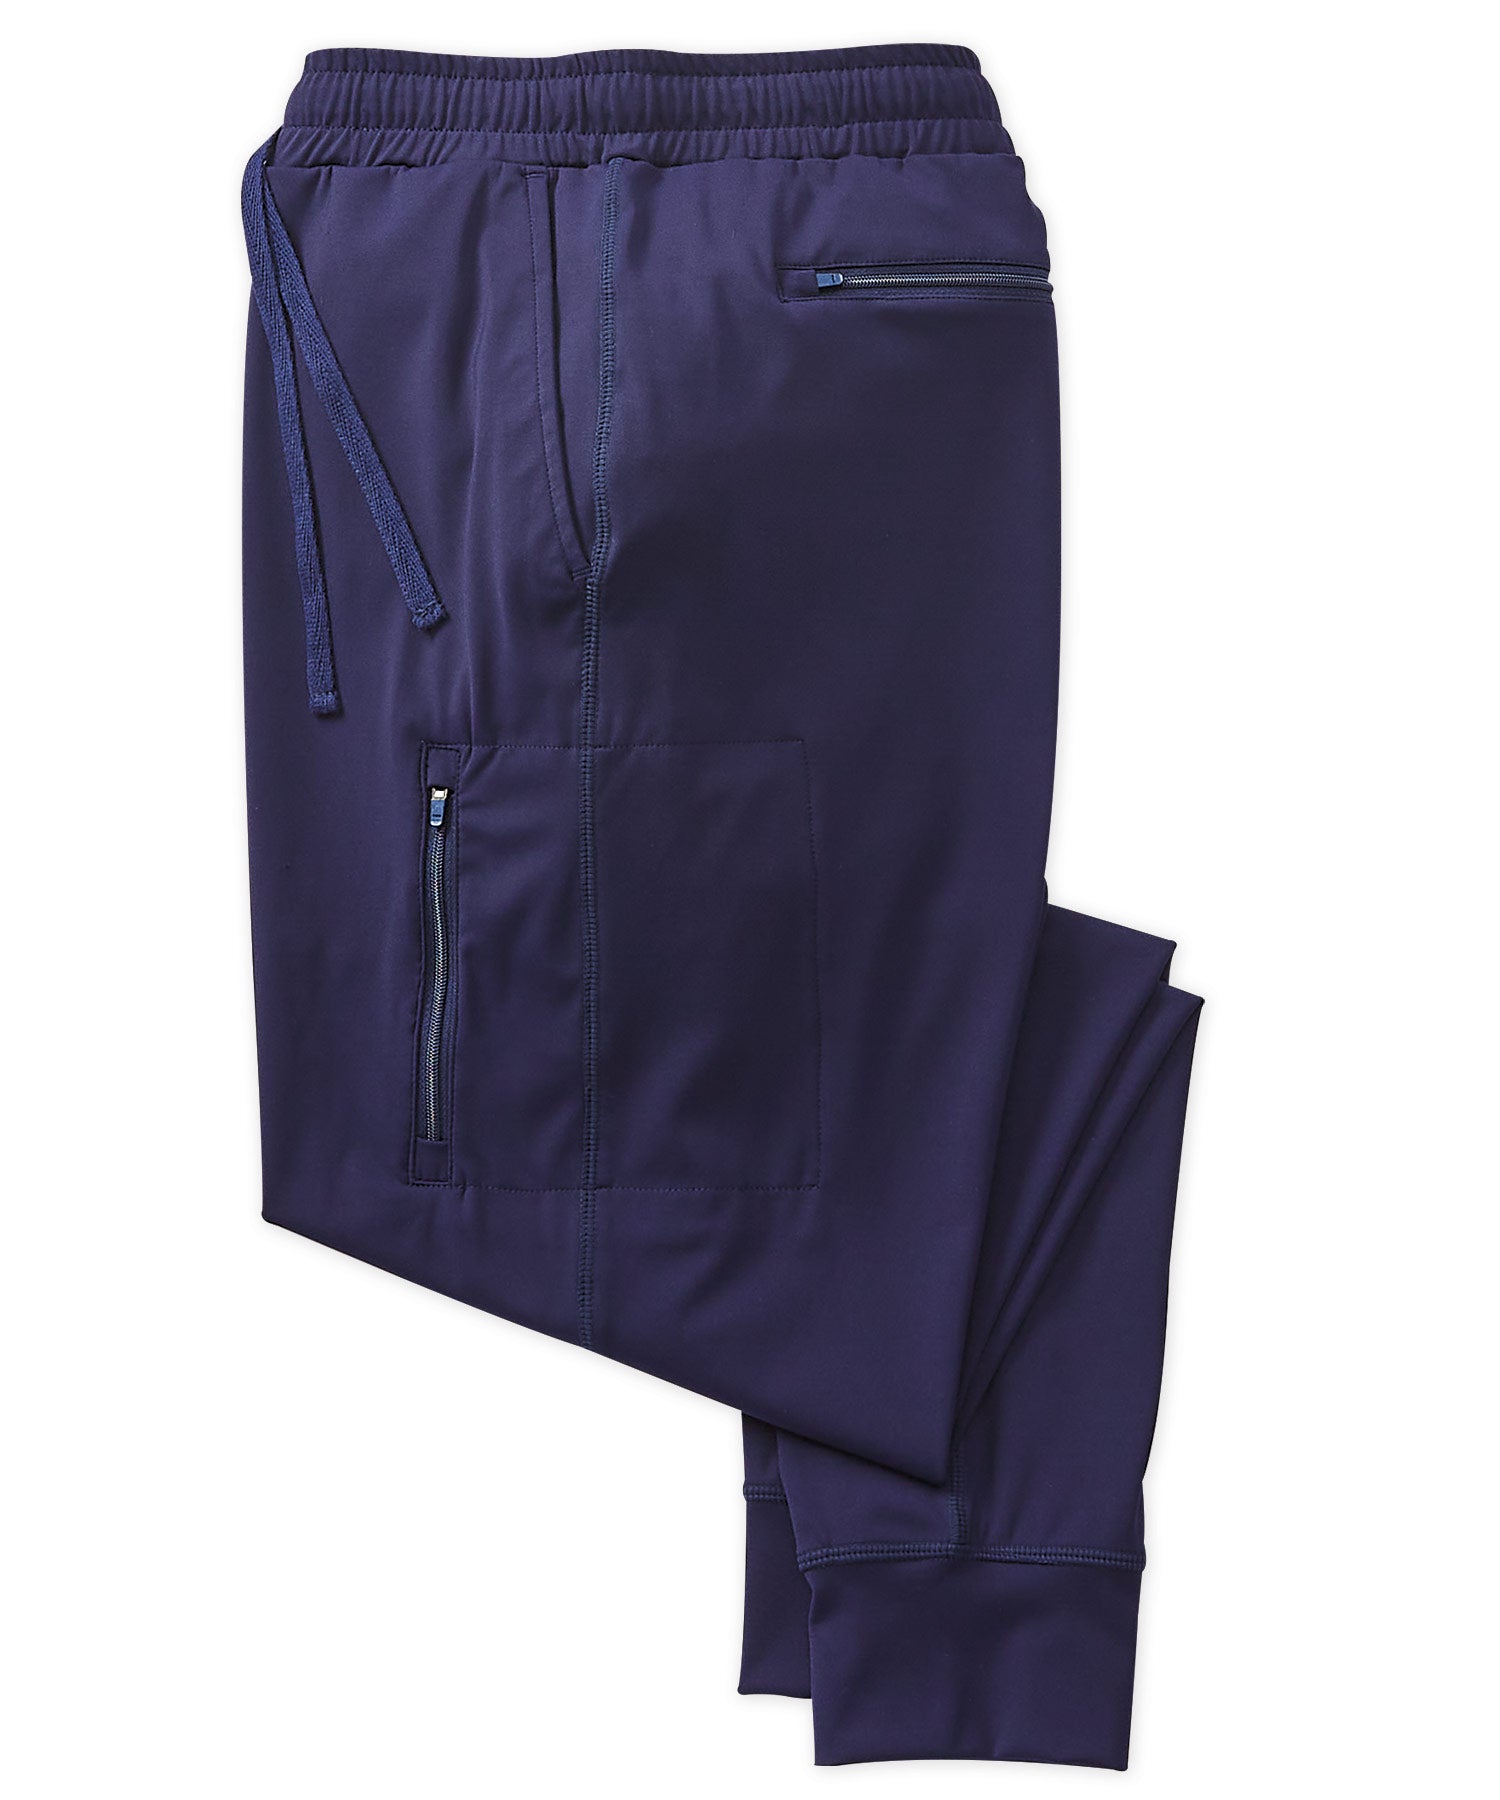 Westport Lifestyle All Day Performance Jogger, Men's Big & Tall